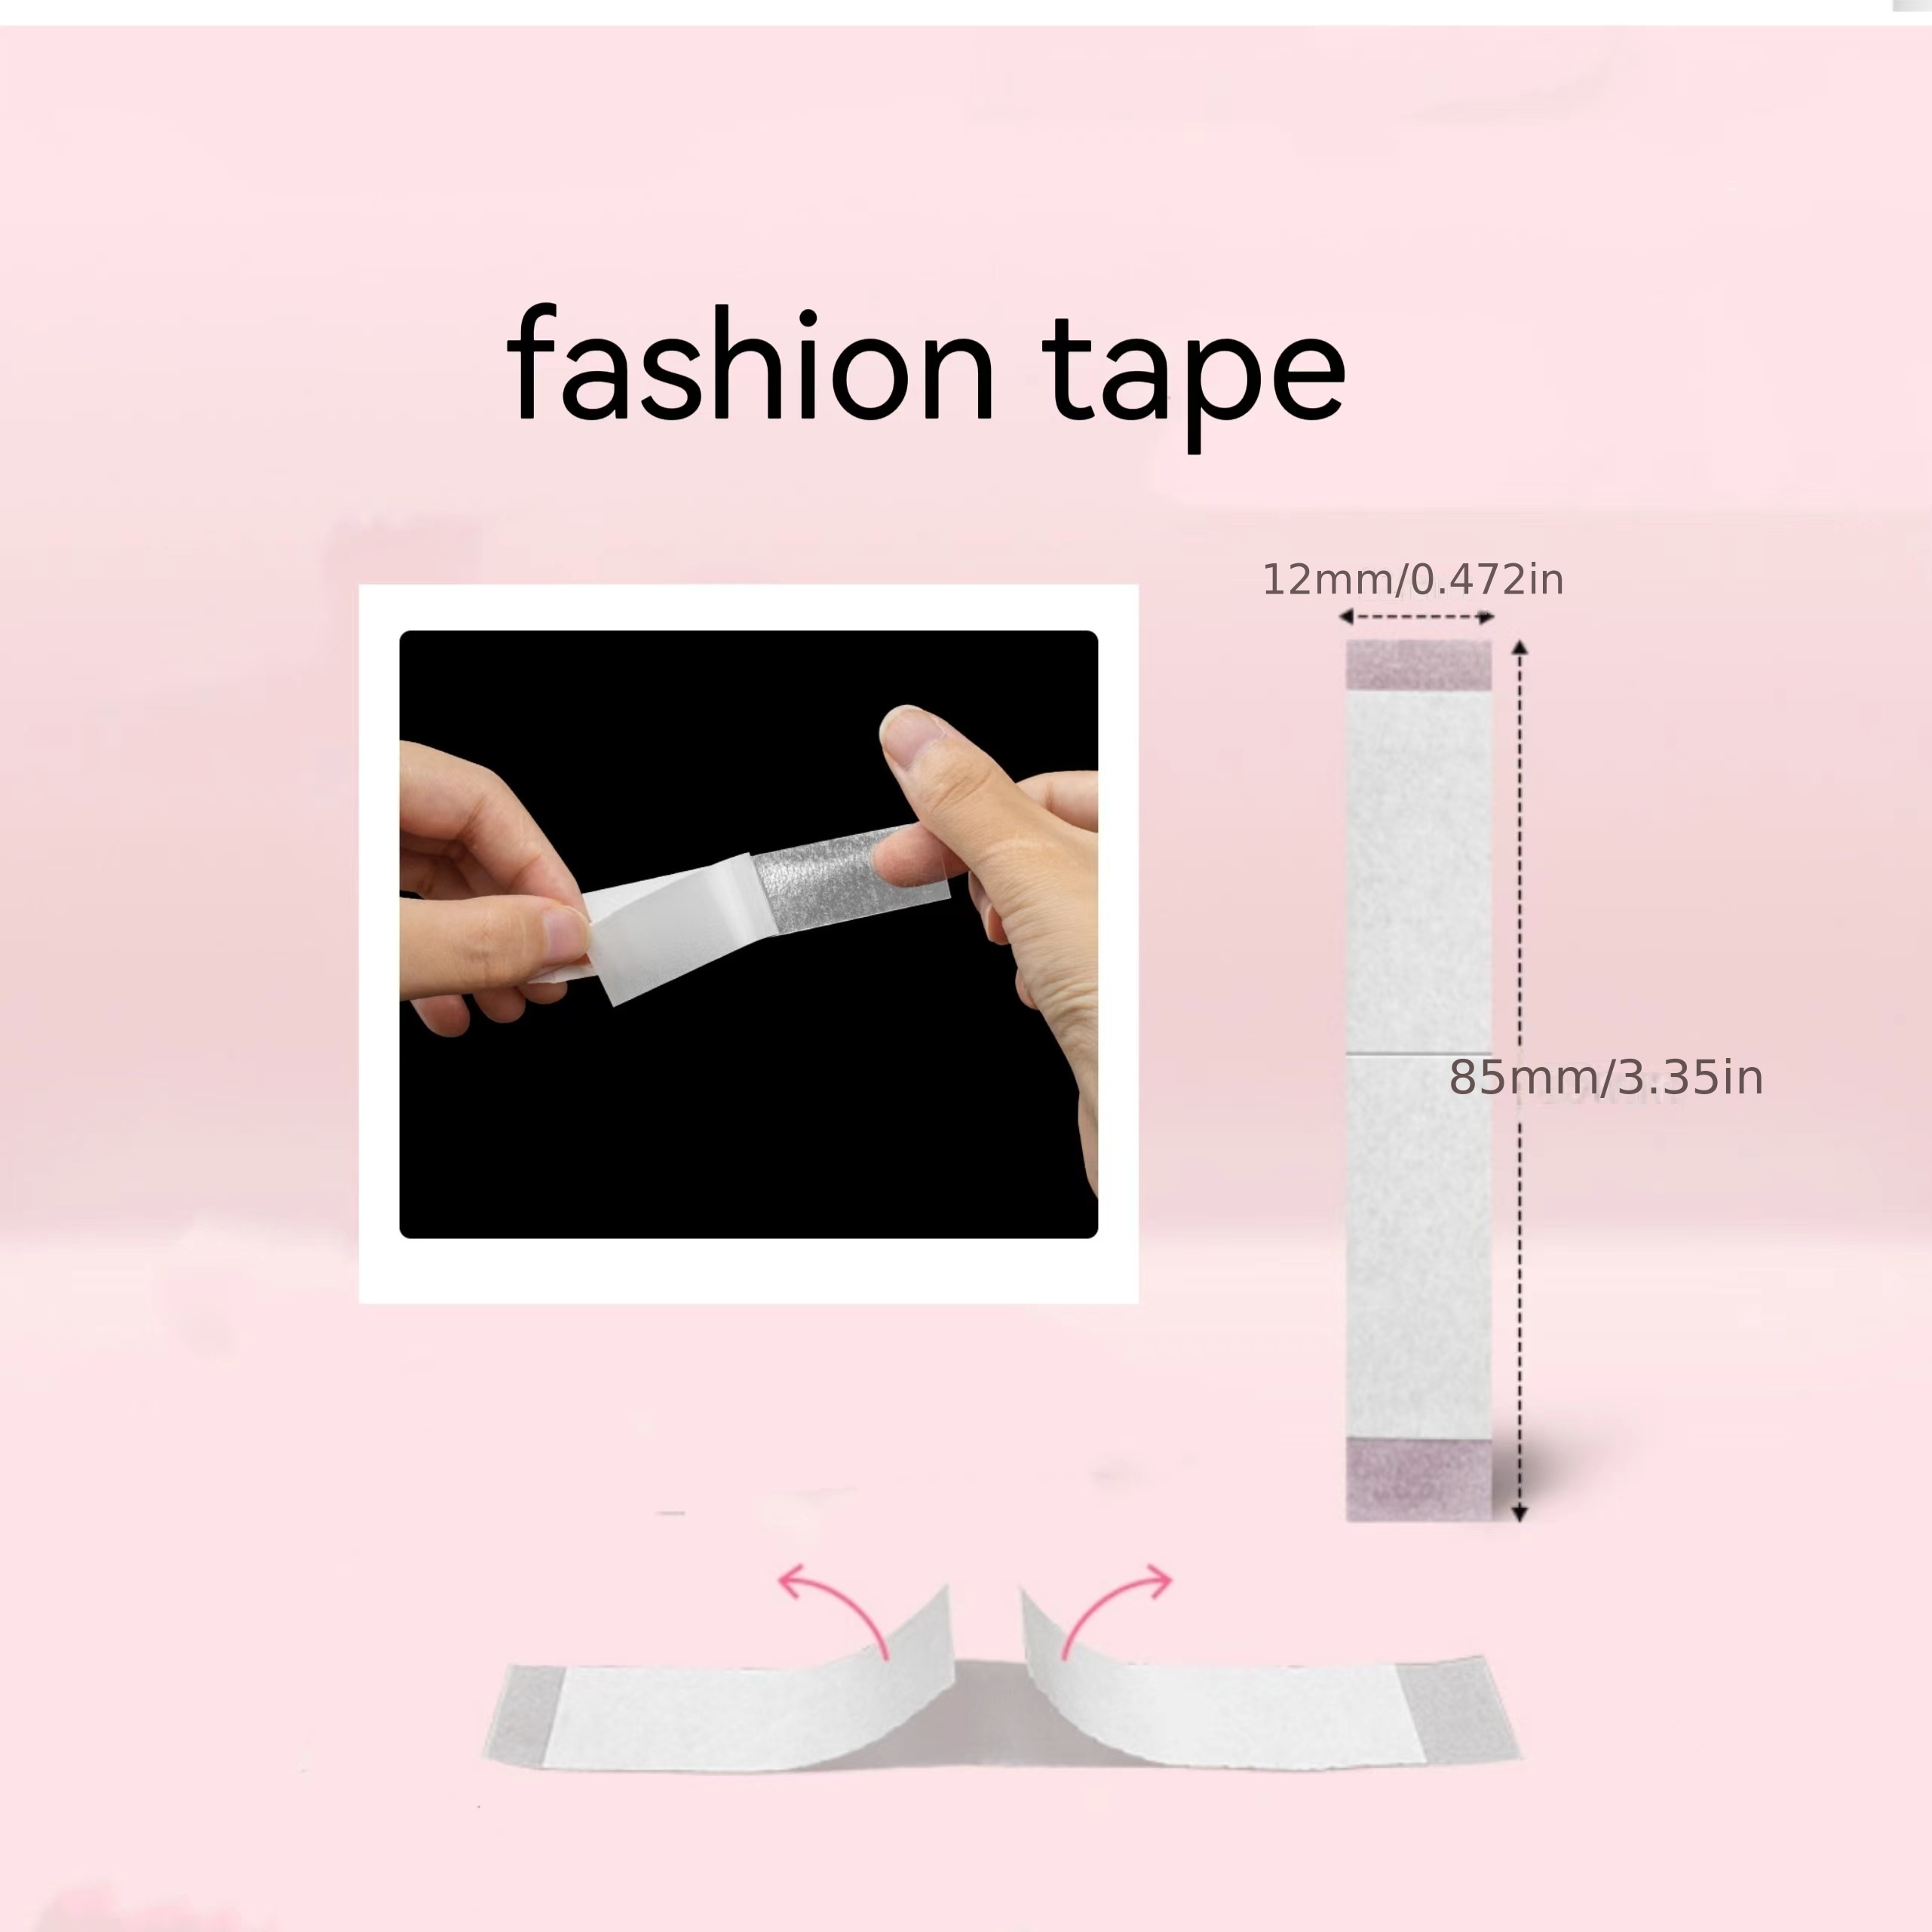 Two Sided Tape Double Sided Body Tape Adhesive Tape Anti Clothing Dress  Tapes Paste Stickers For Bra Strap Clothes Dress 5*16mm